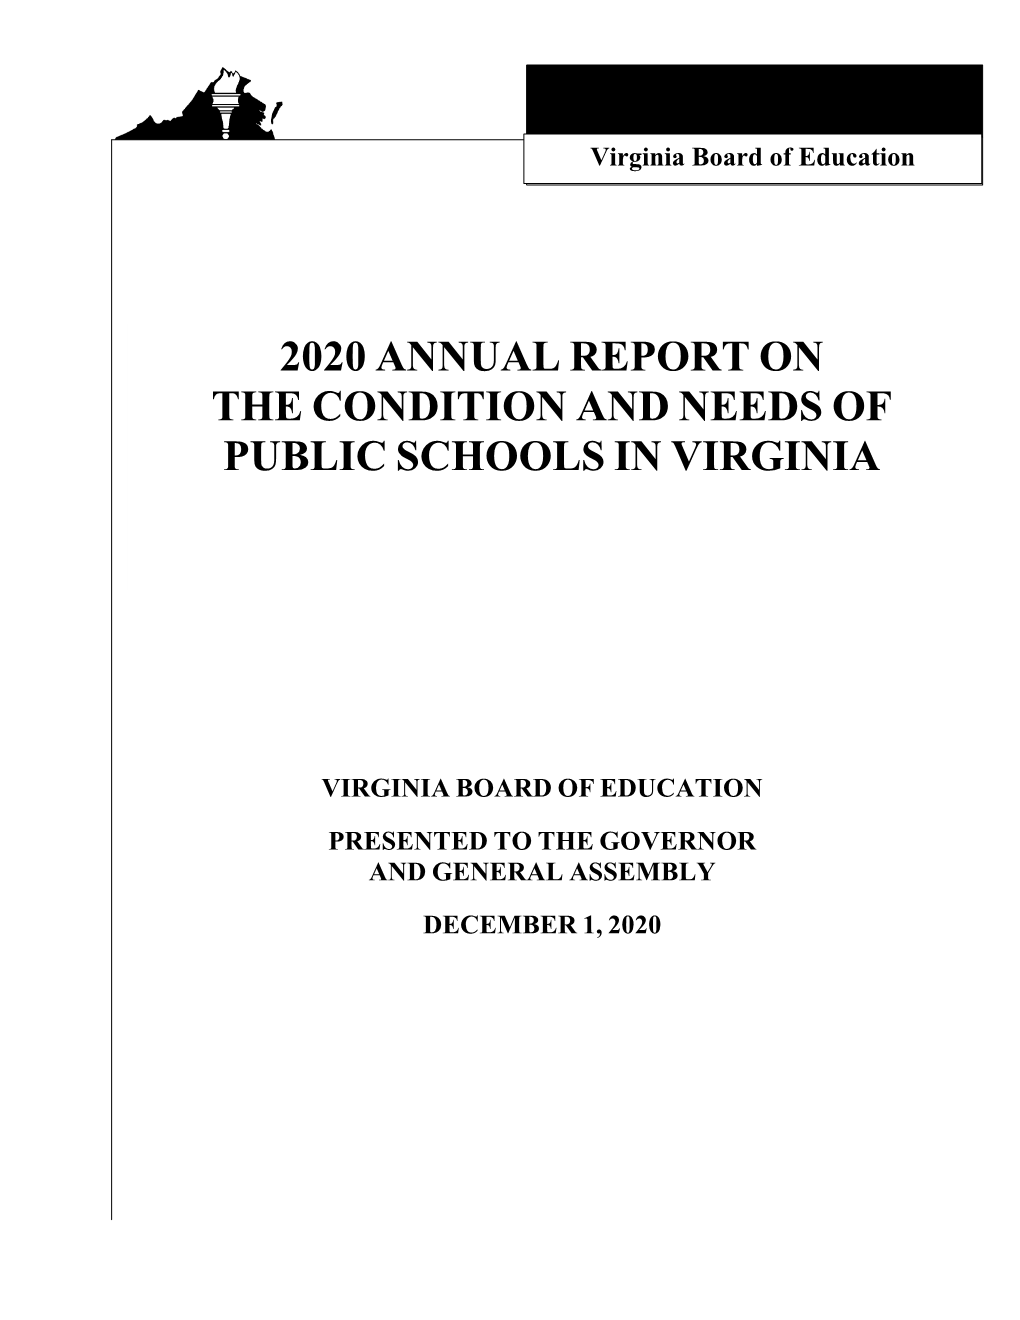 2020 Annual Report on the Condition and Needs of Public Schools in Virginia